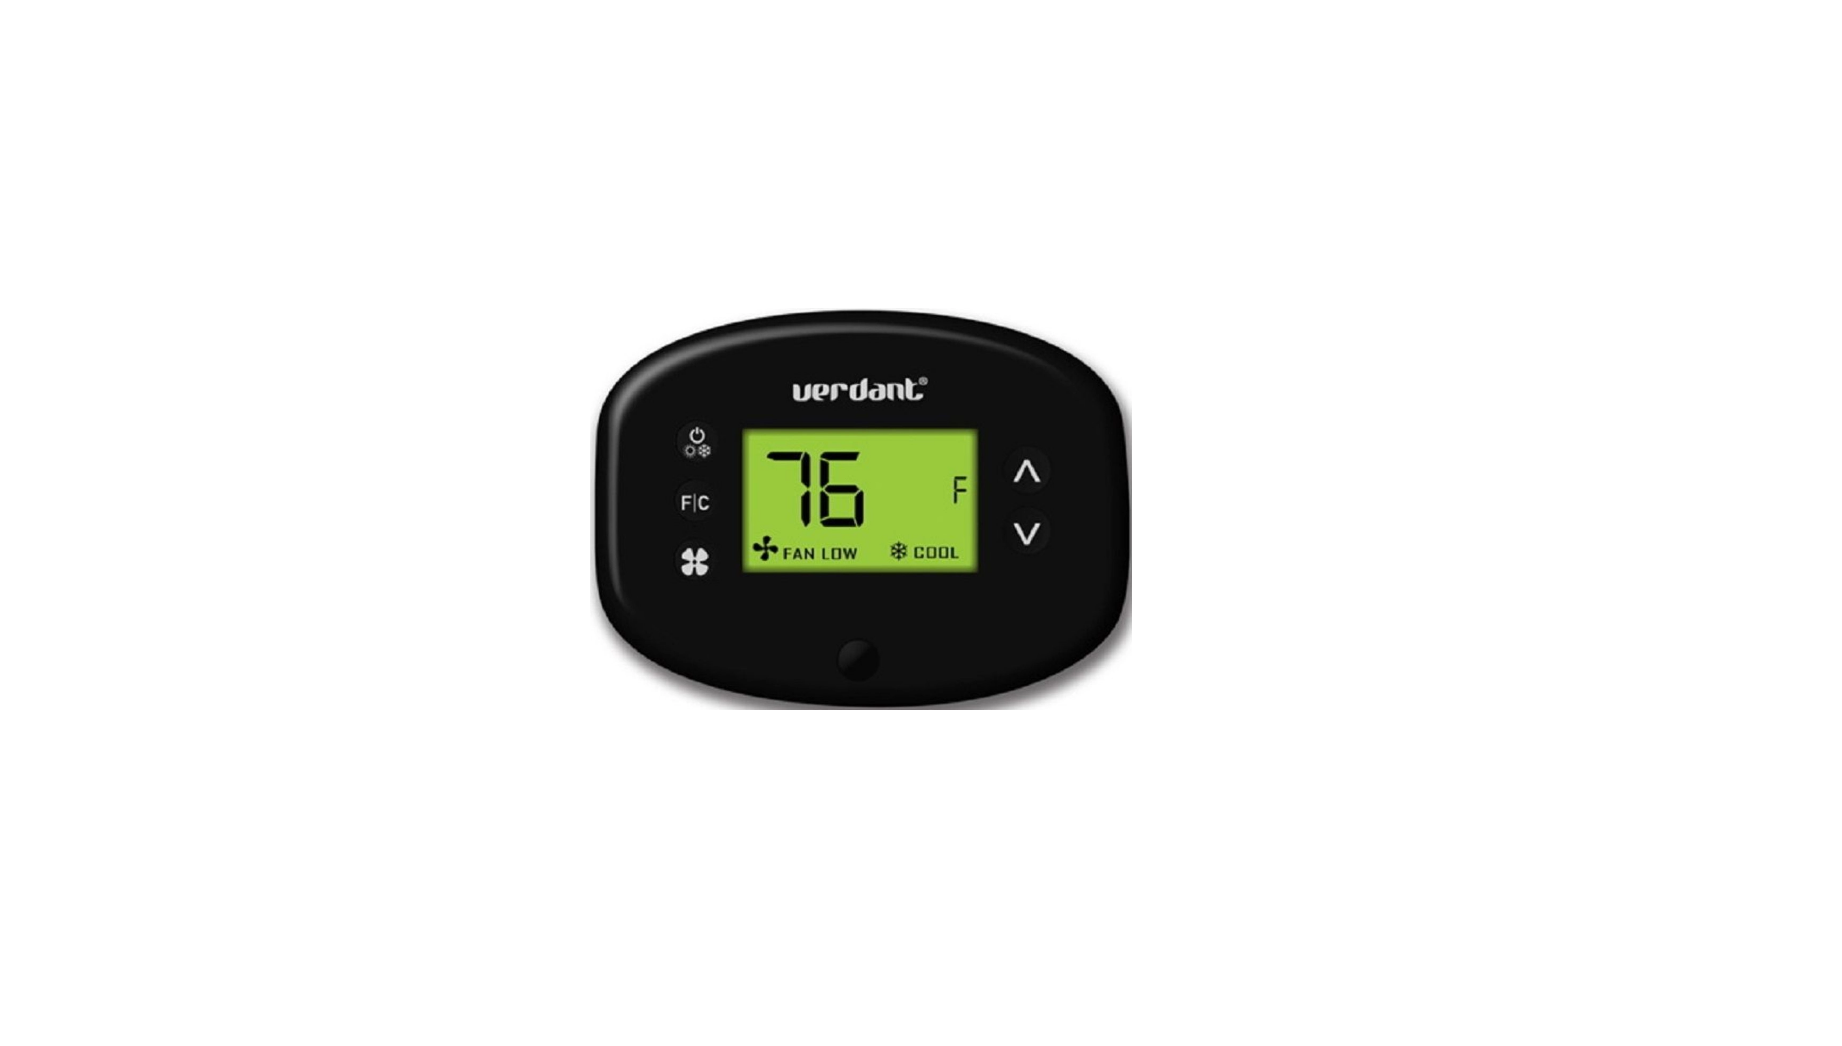 Verdant VX3-TW-KT-W Wireless Energy Thermostat Product Specifications Guide